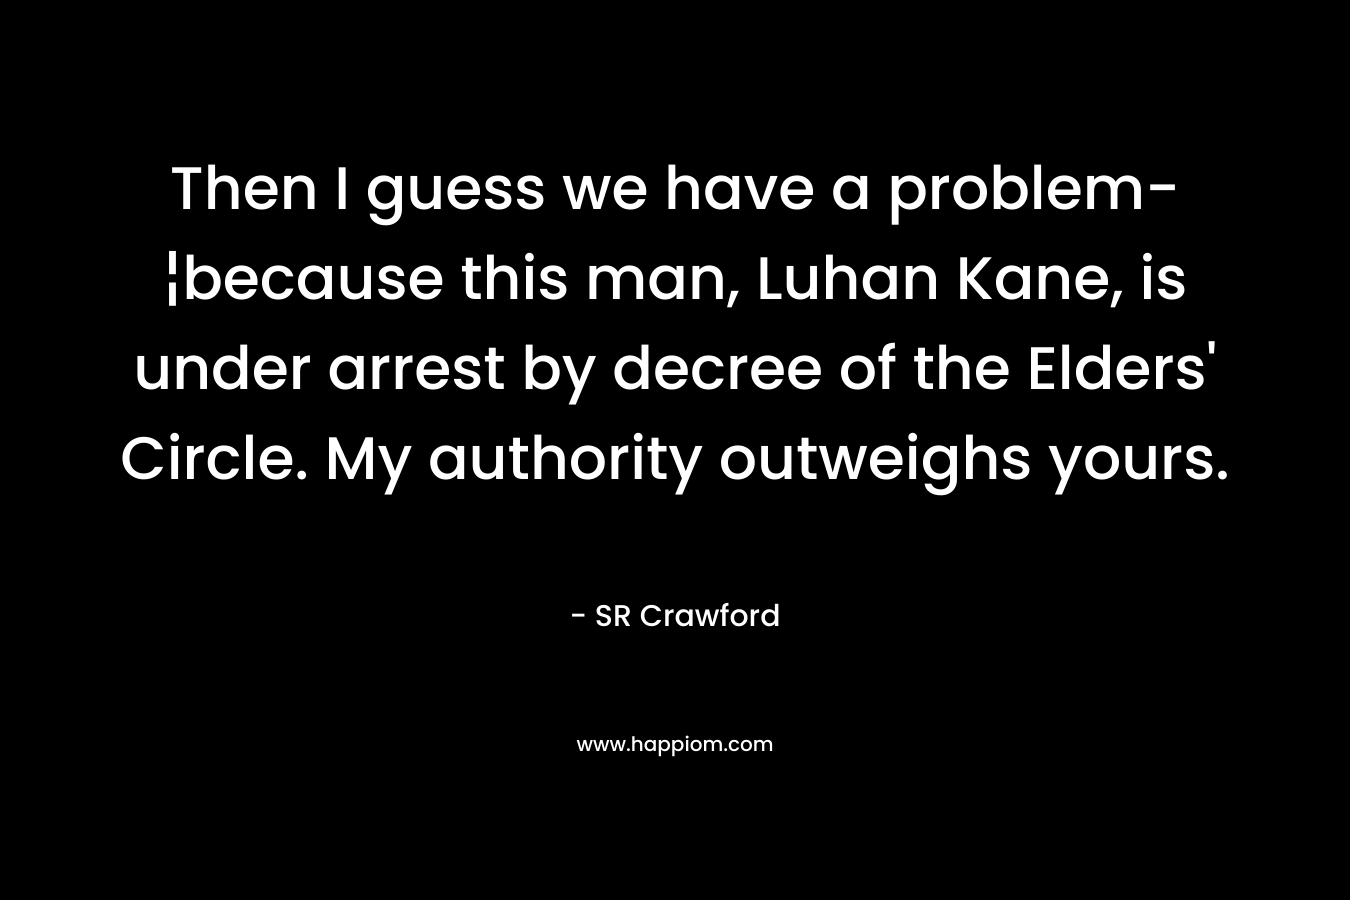 Then I guess we have a problem-¦because this man, Luhan Kane, is under arrest by decree of the Elders’ Circle. My authority outweighs yours. – SR Crawford